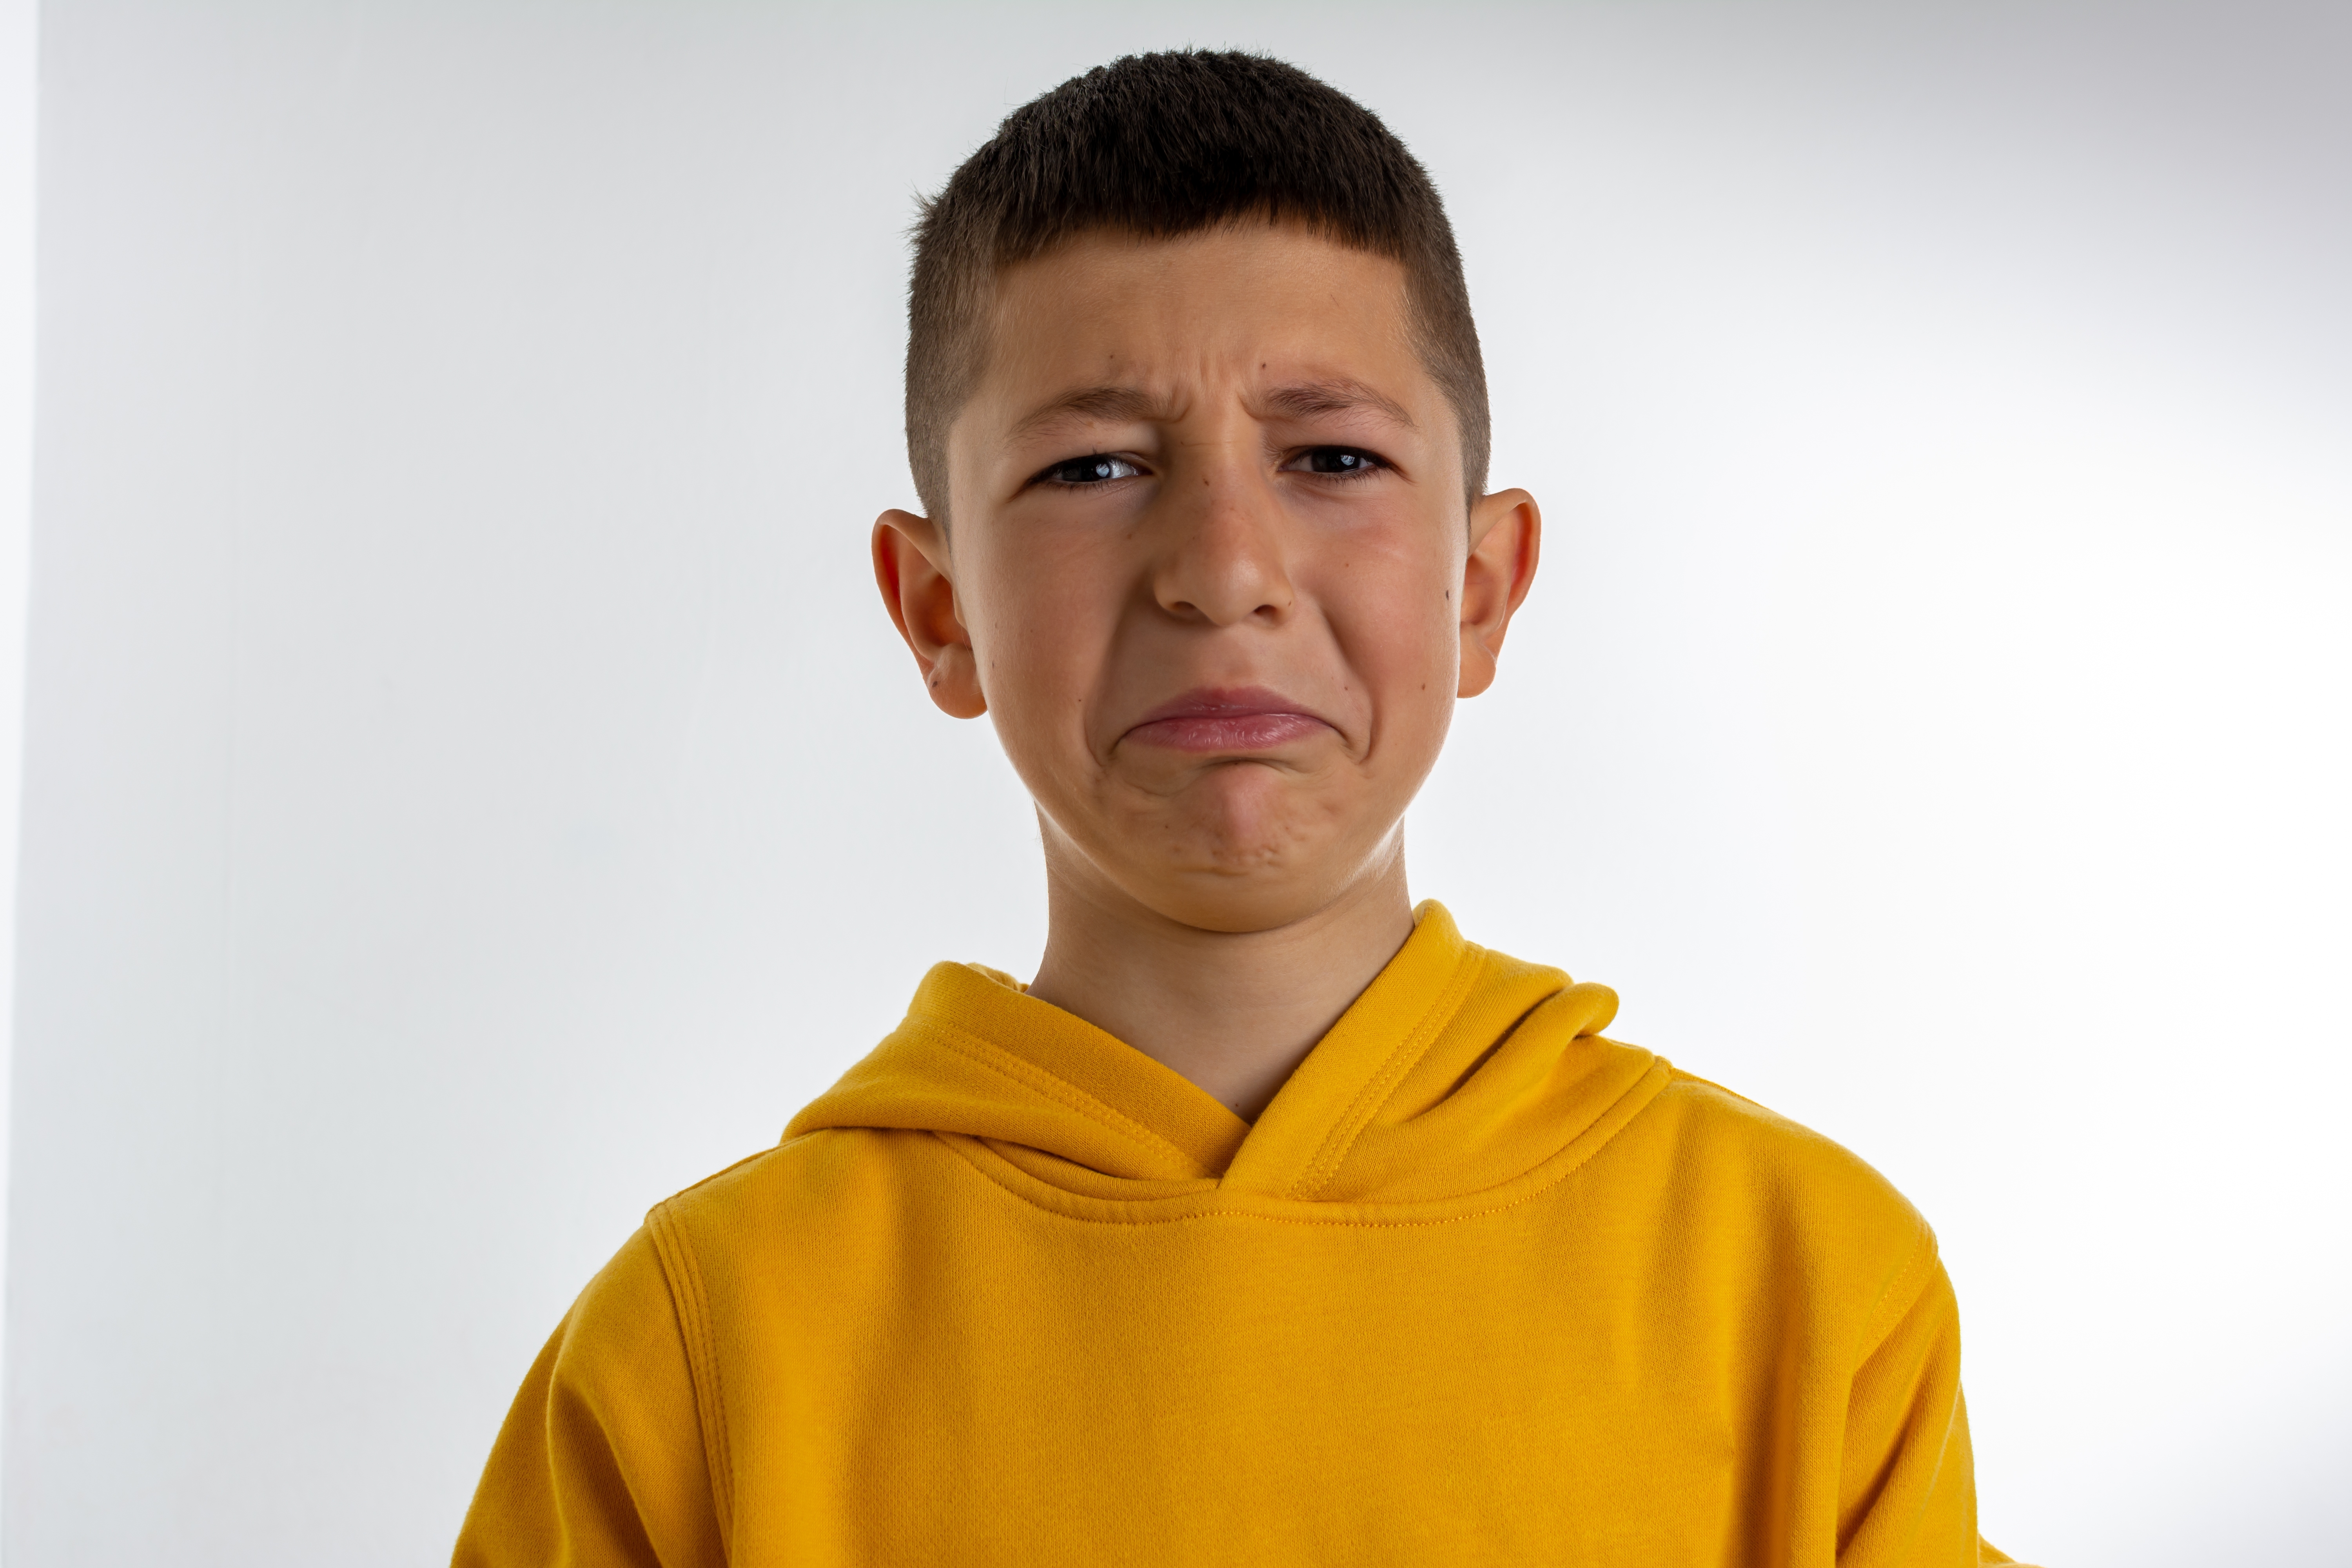 A young boy crying | Source: Shutterstock